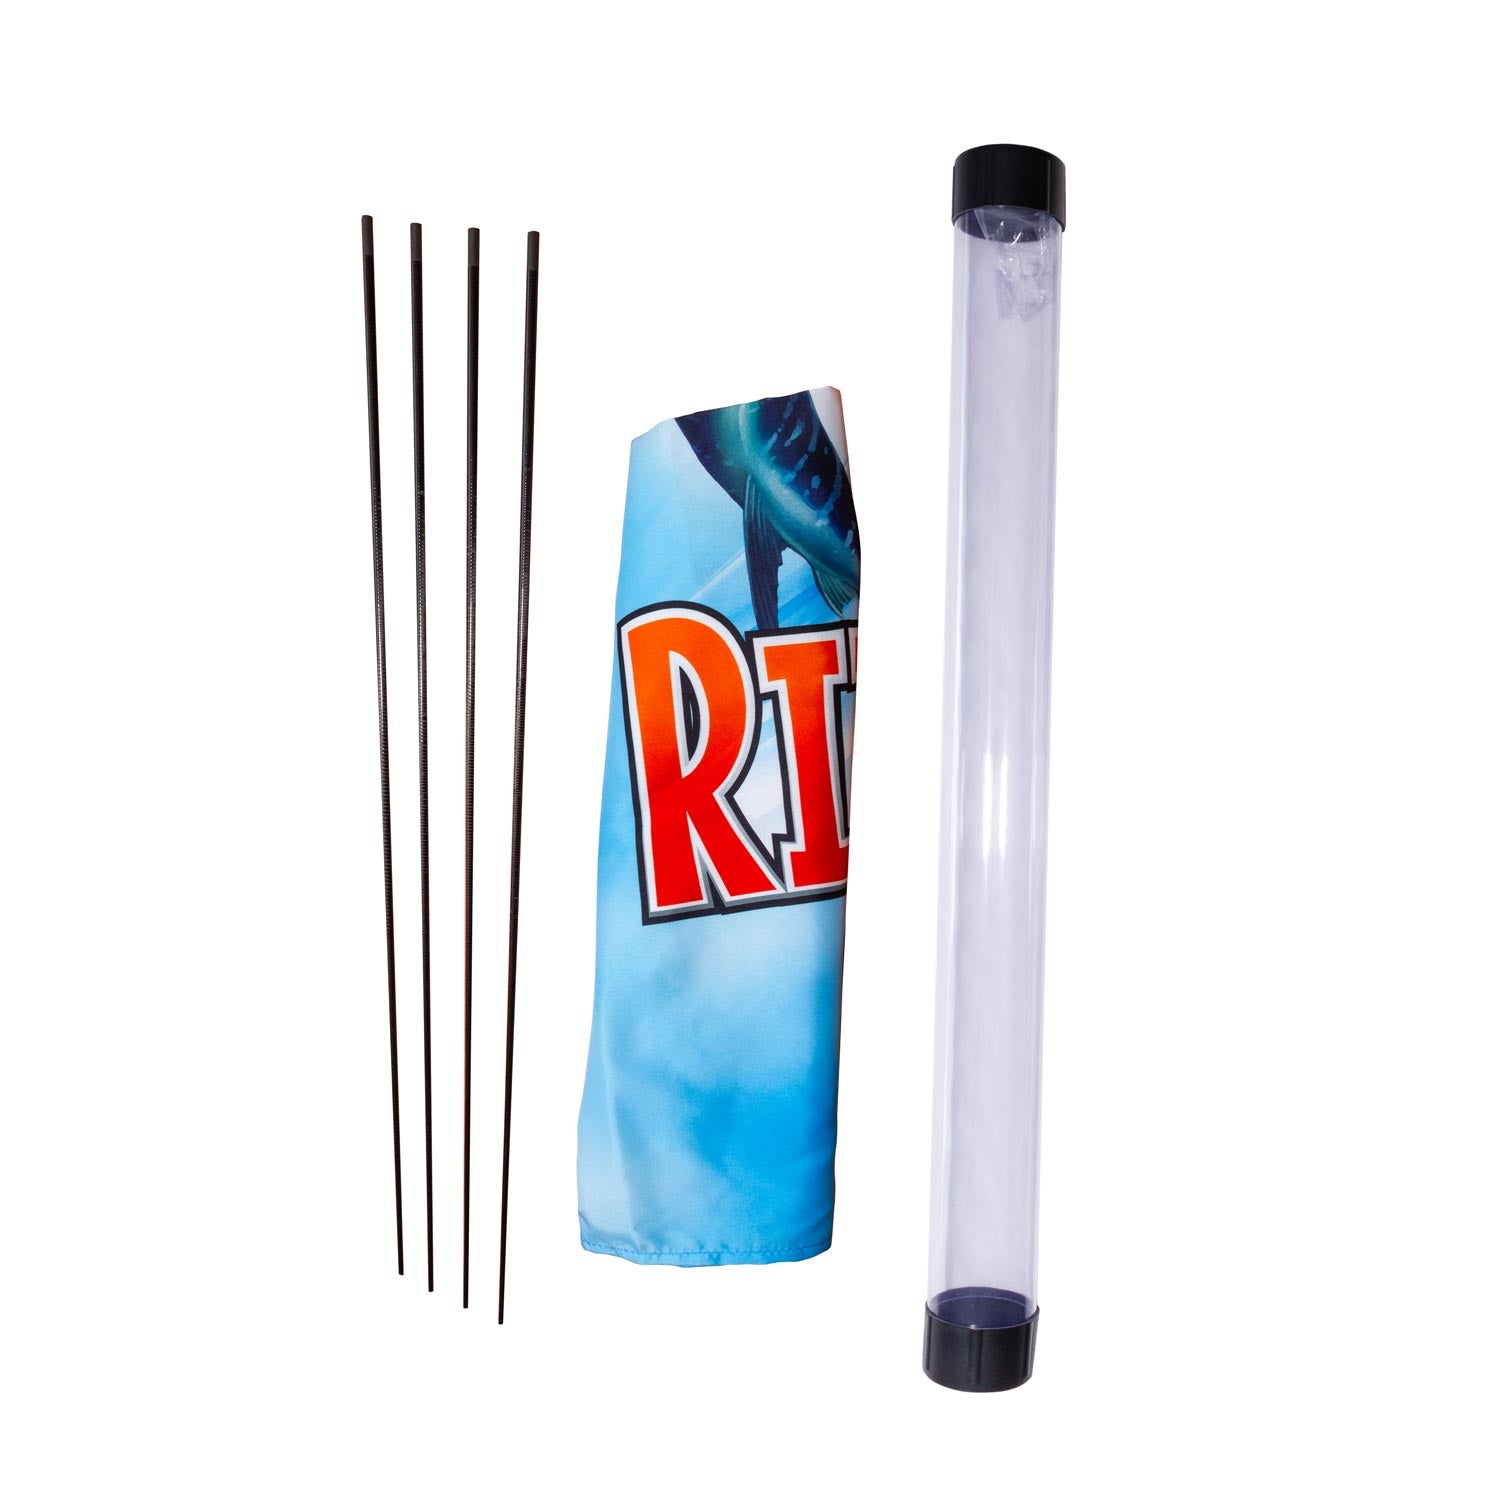 Rite Angler Fishing Kite Package Contents